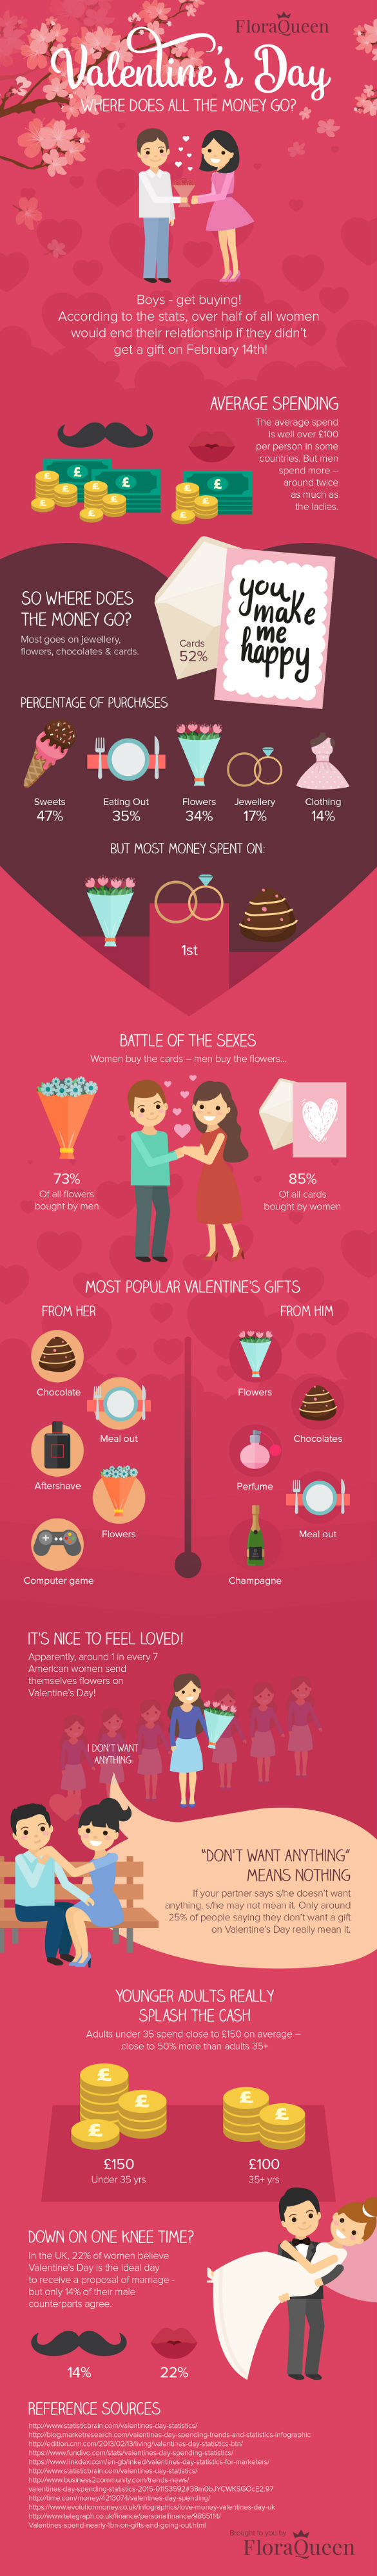 Curious facts about Valentine’s Day